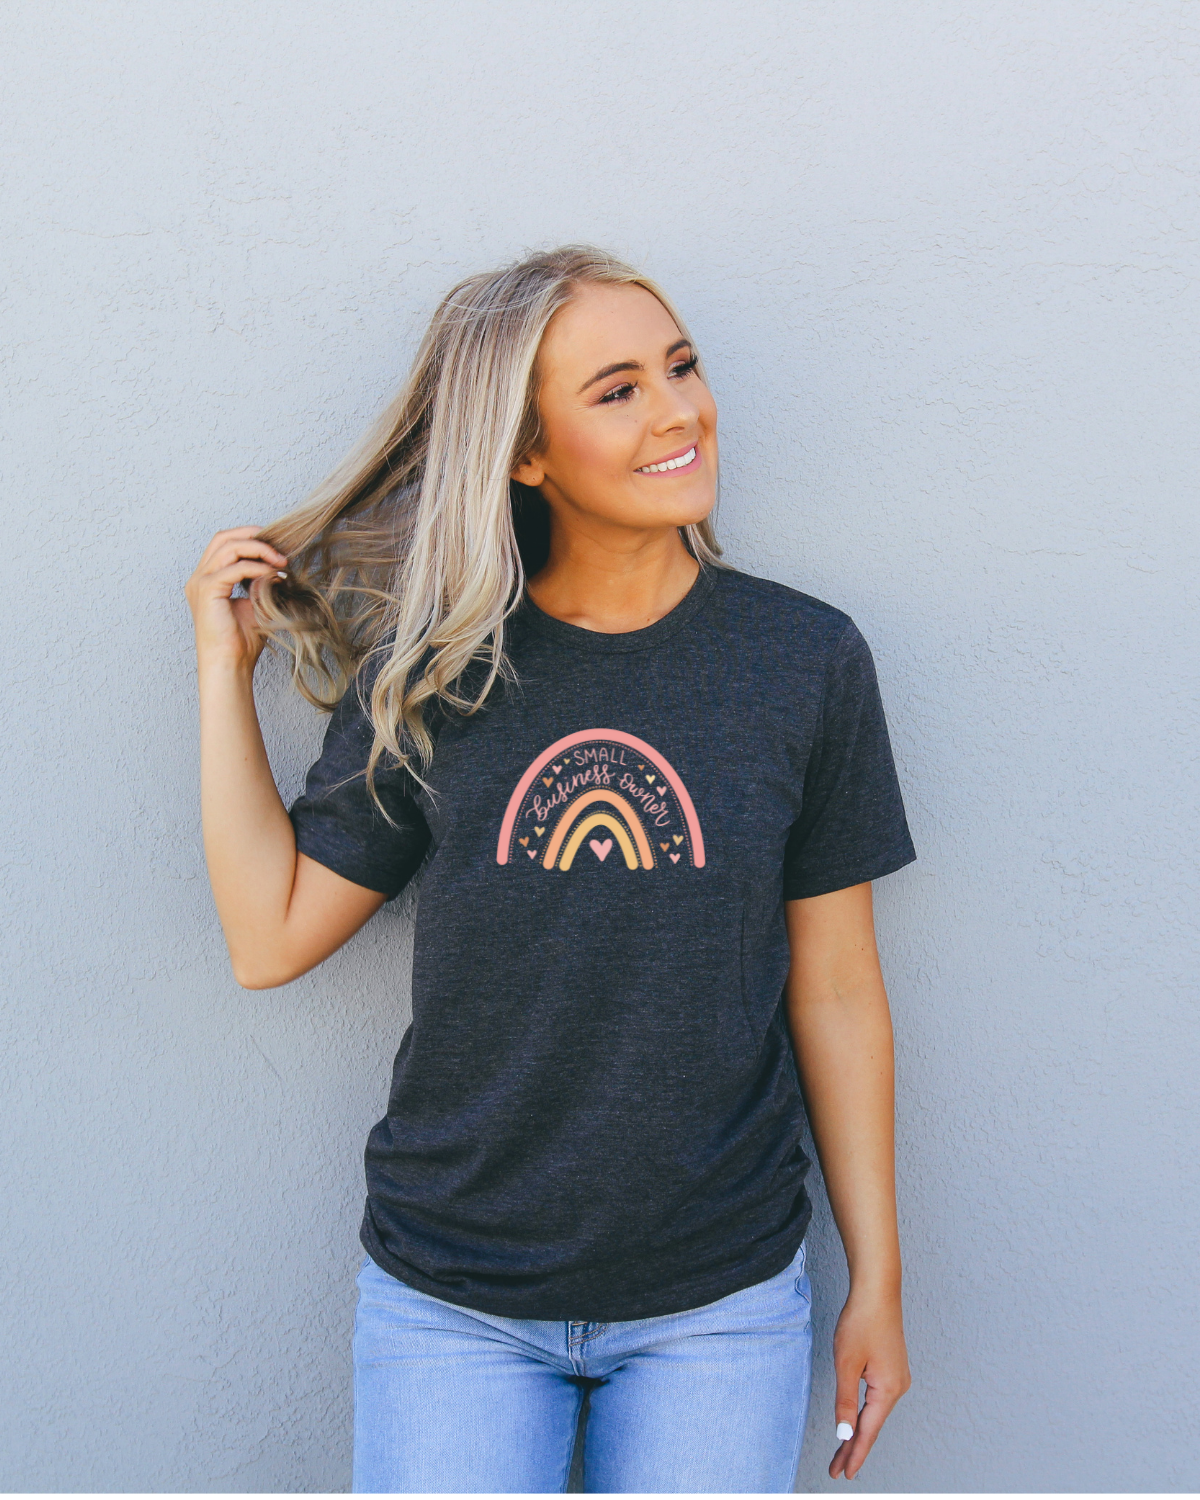 Small Business Owner Rainbow Tee